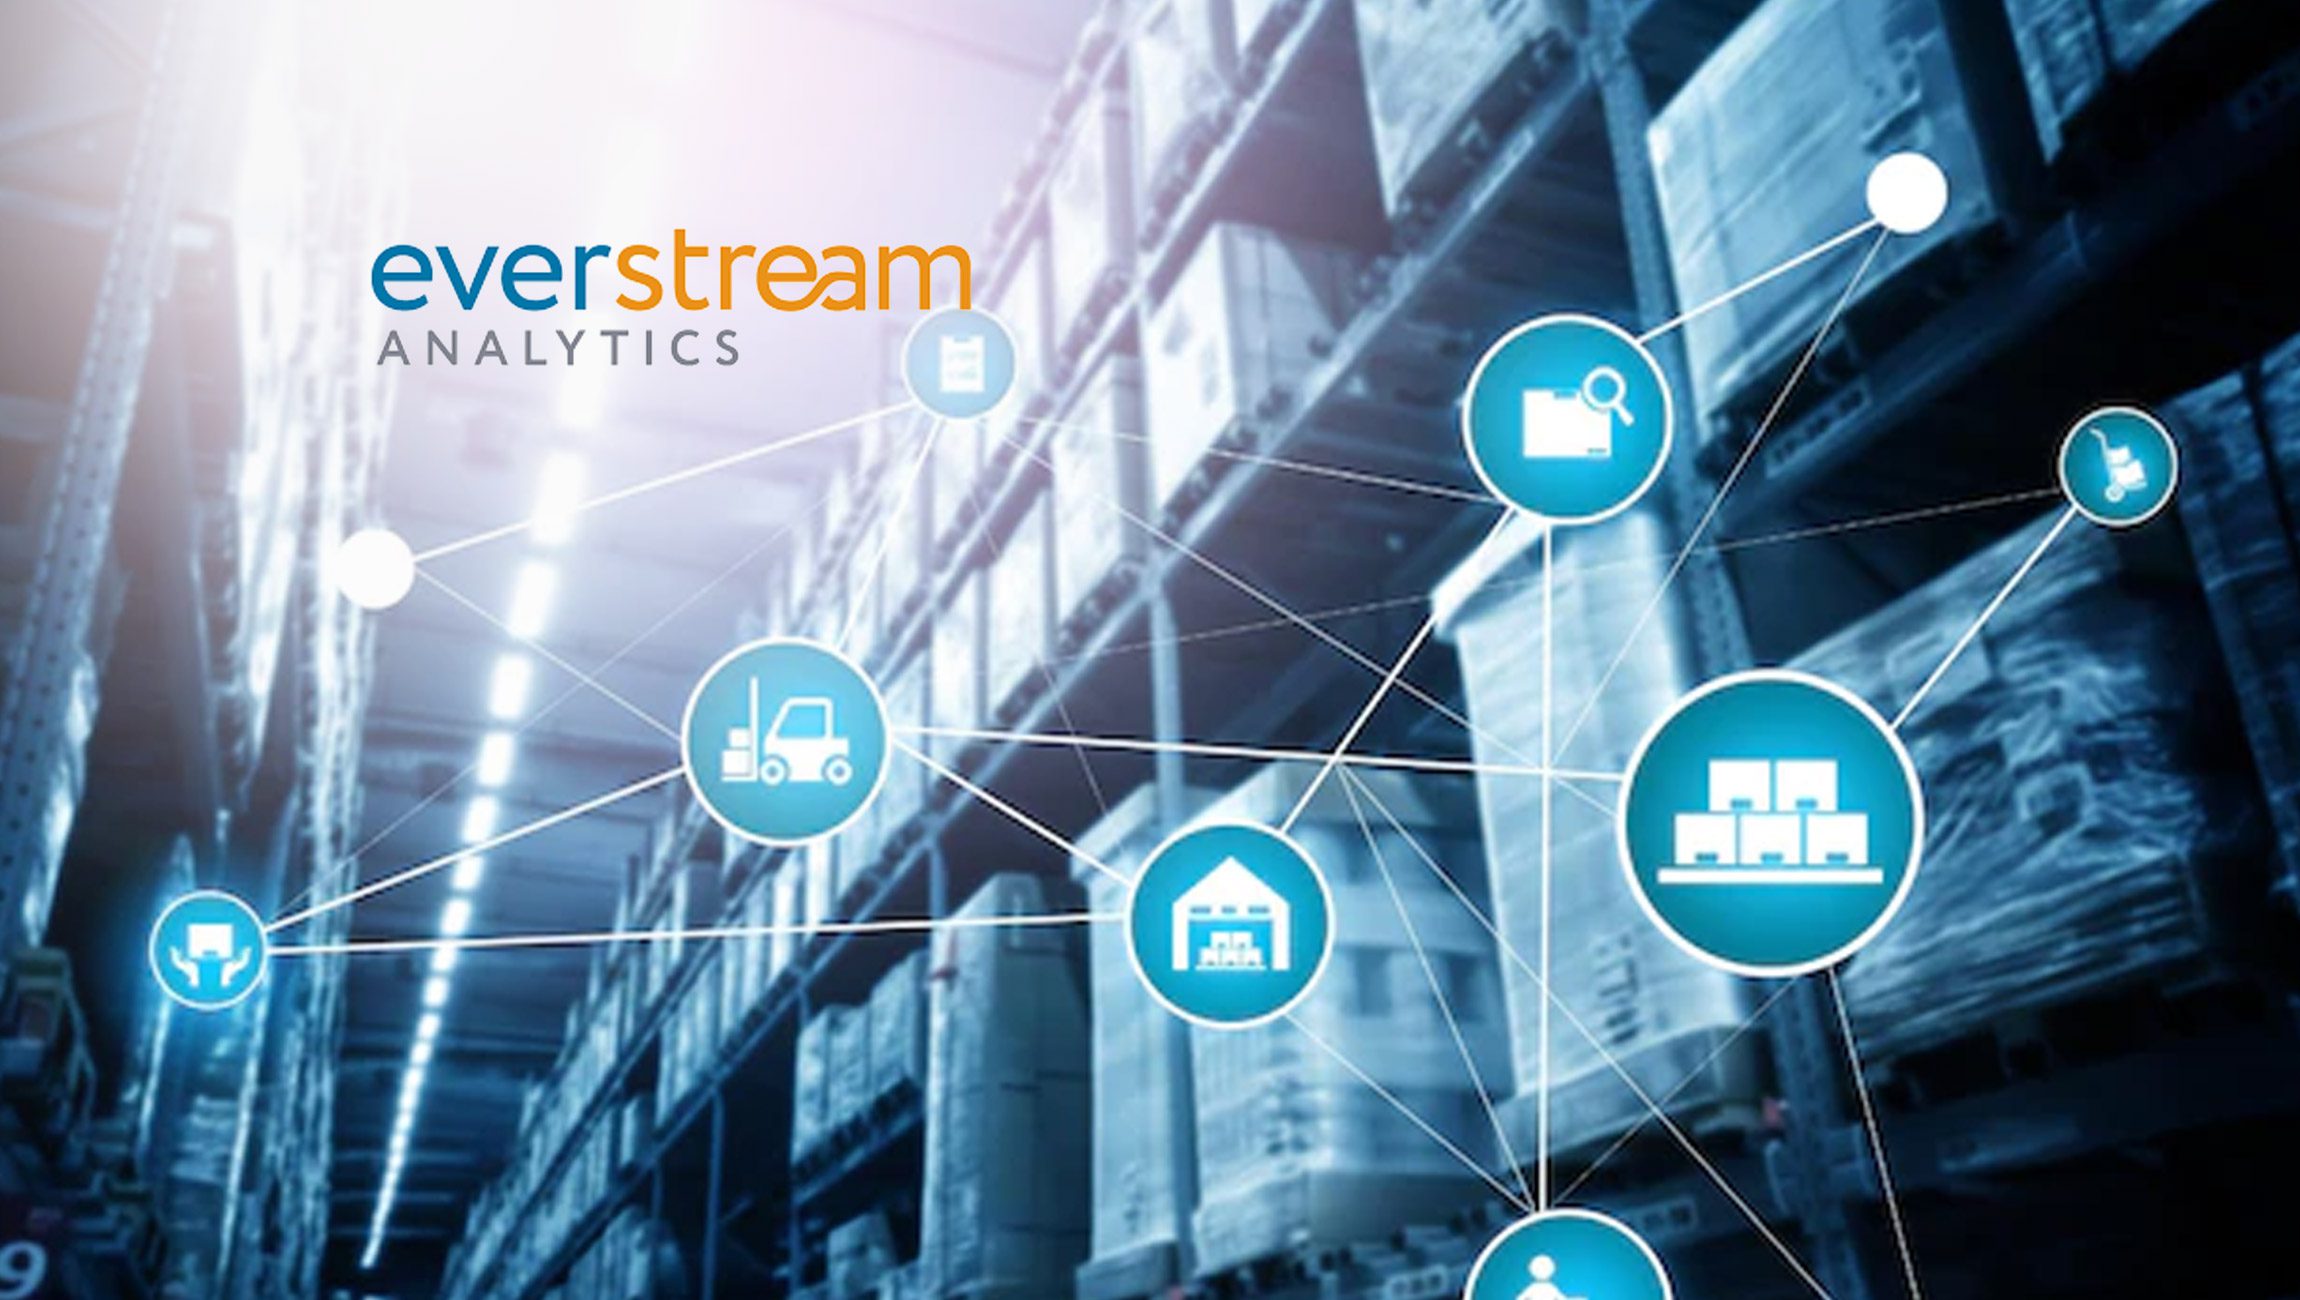 Everstream Analytics Named 2022 Top Food Chain Technology by Food Chain Digest